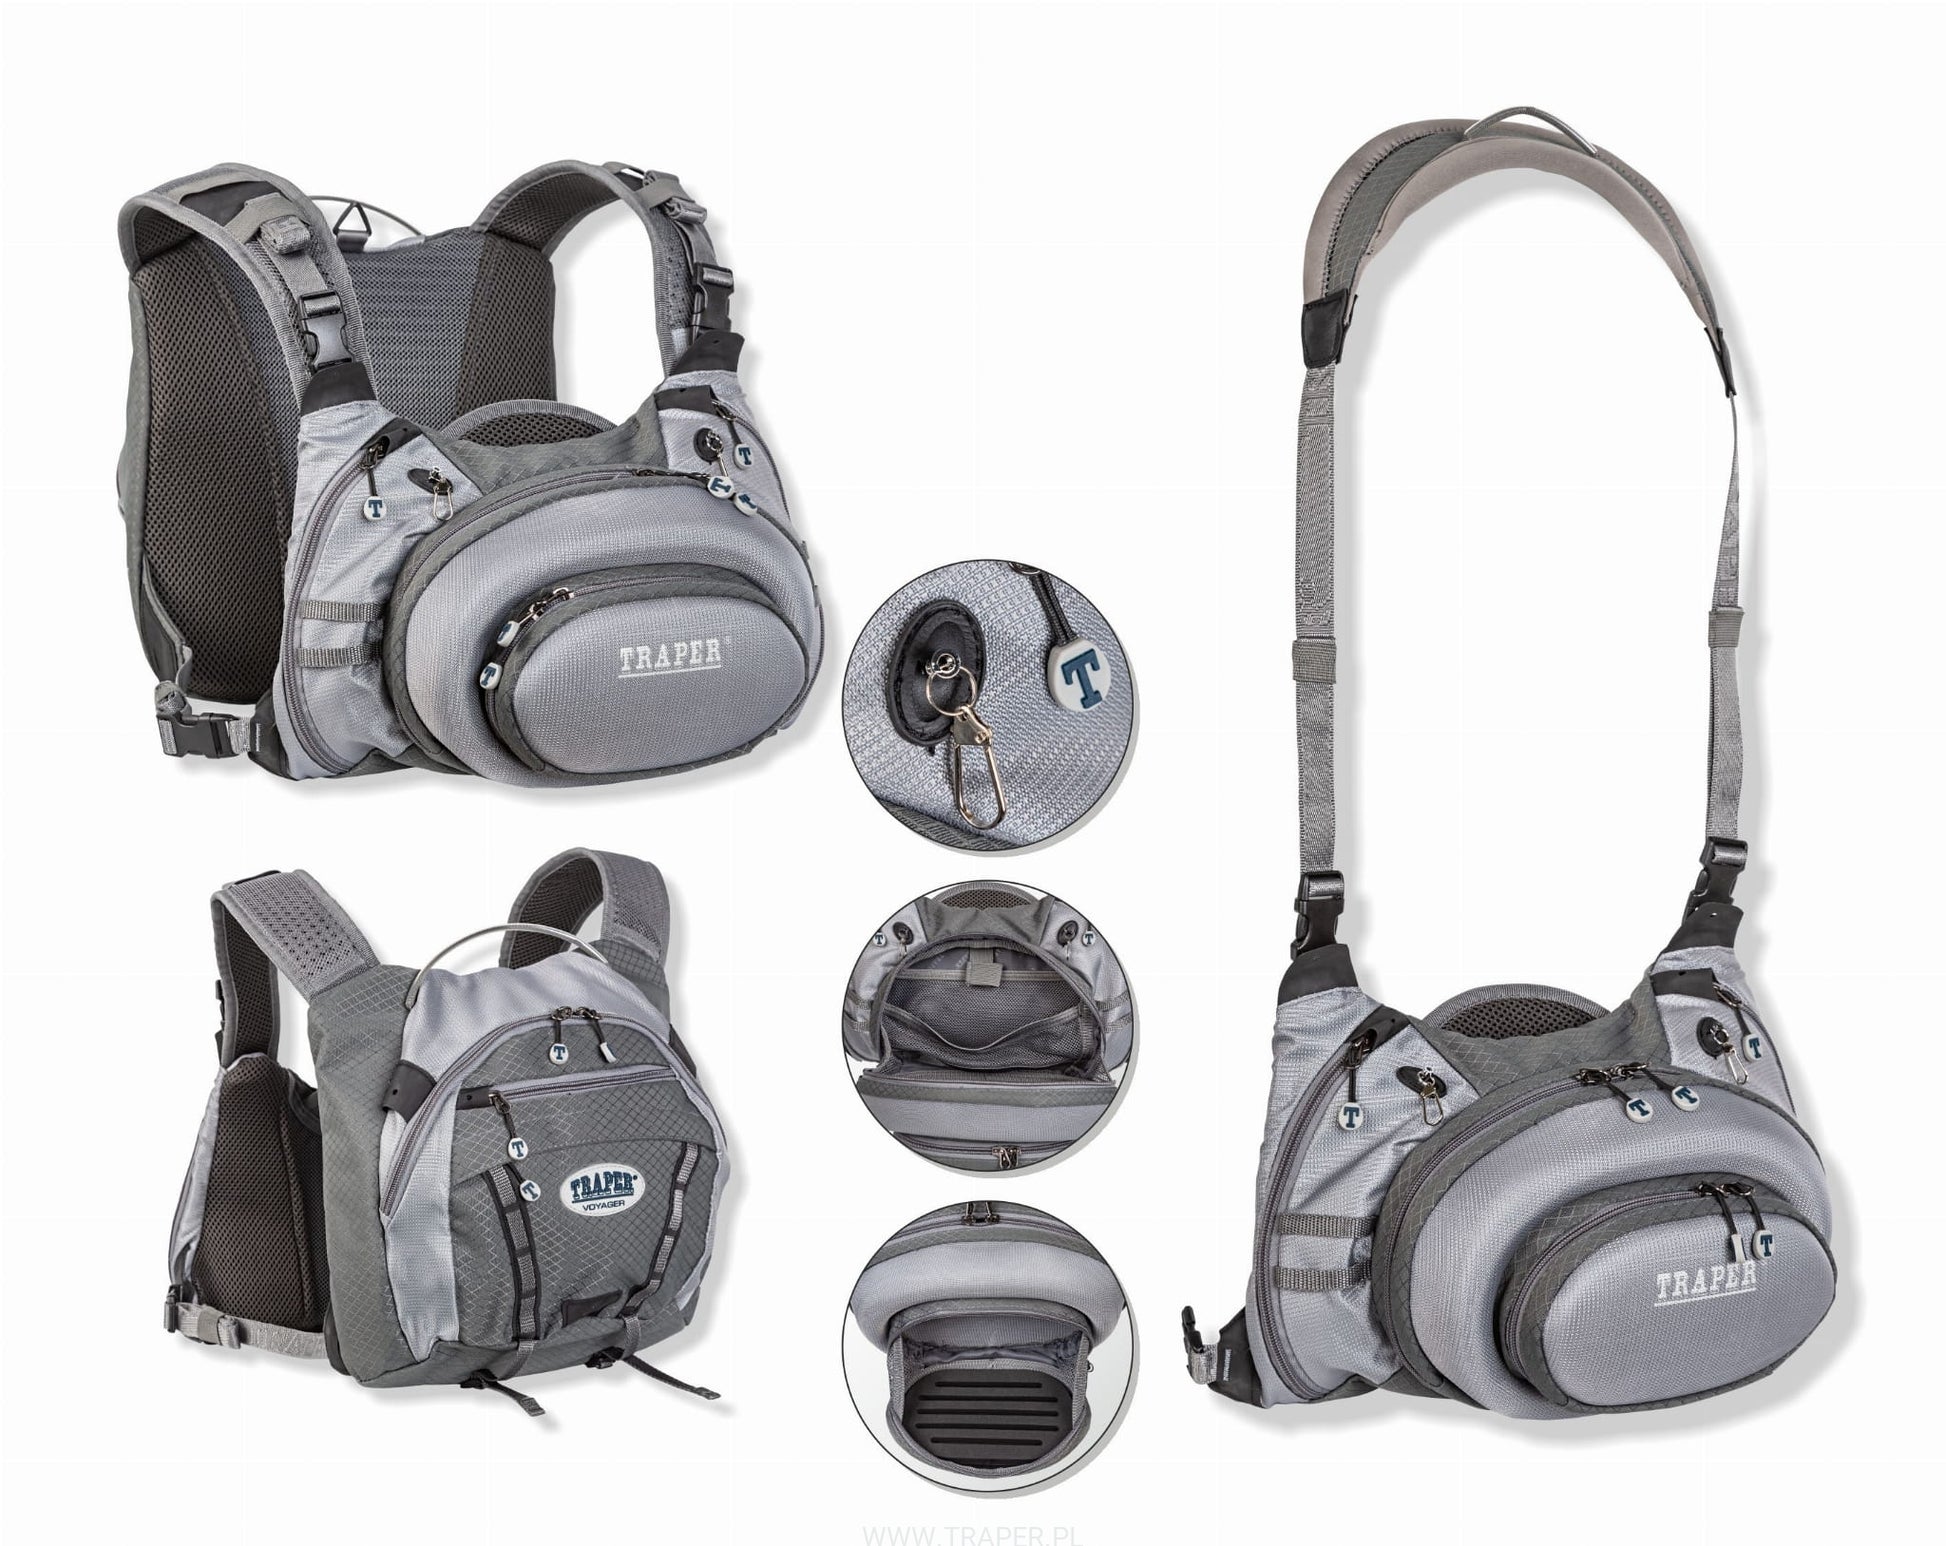 CHEST & BACKPACK VOYAGER TRAPER – Two River Anglers